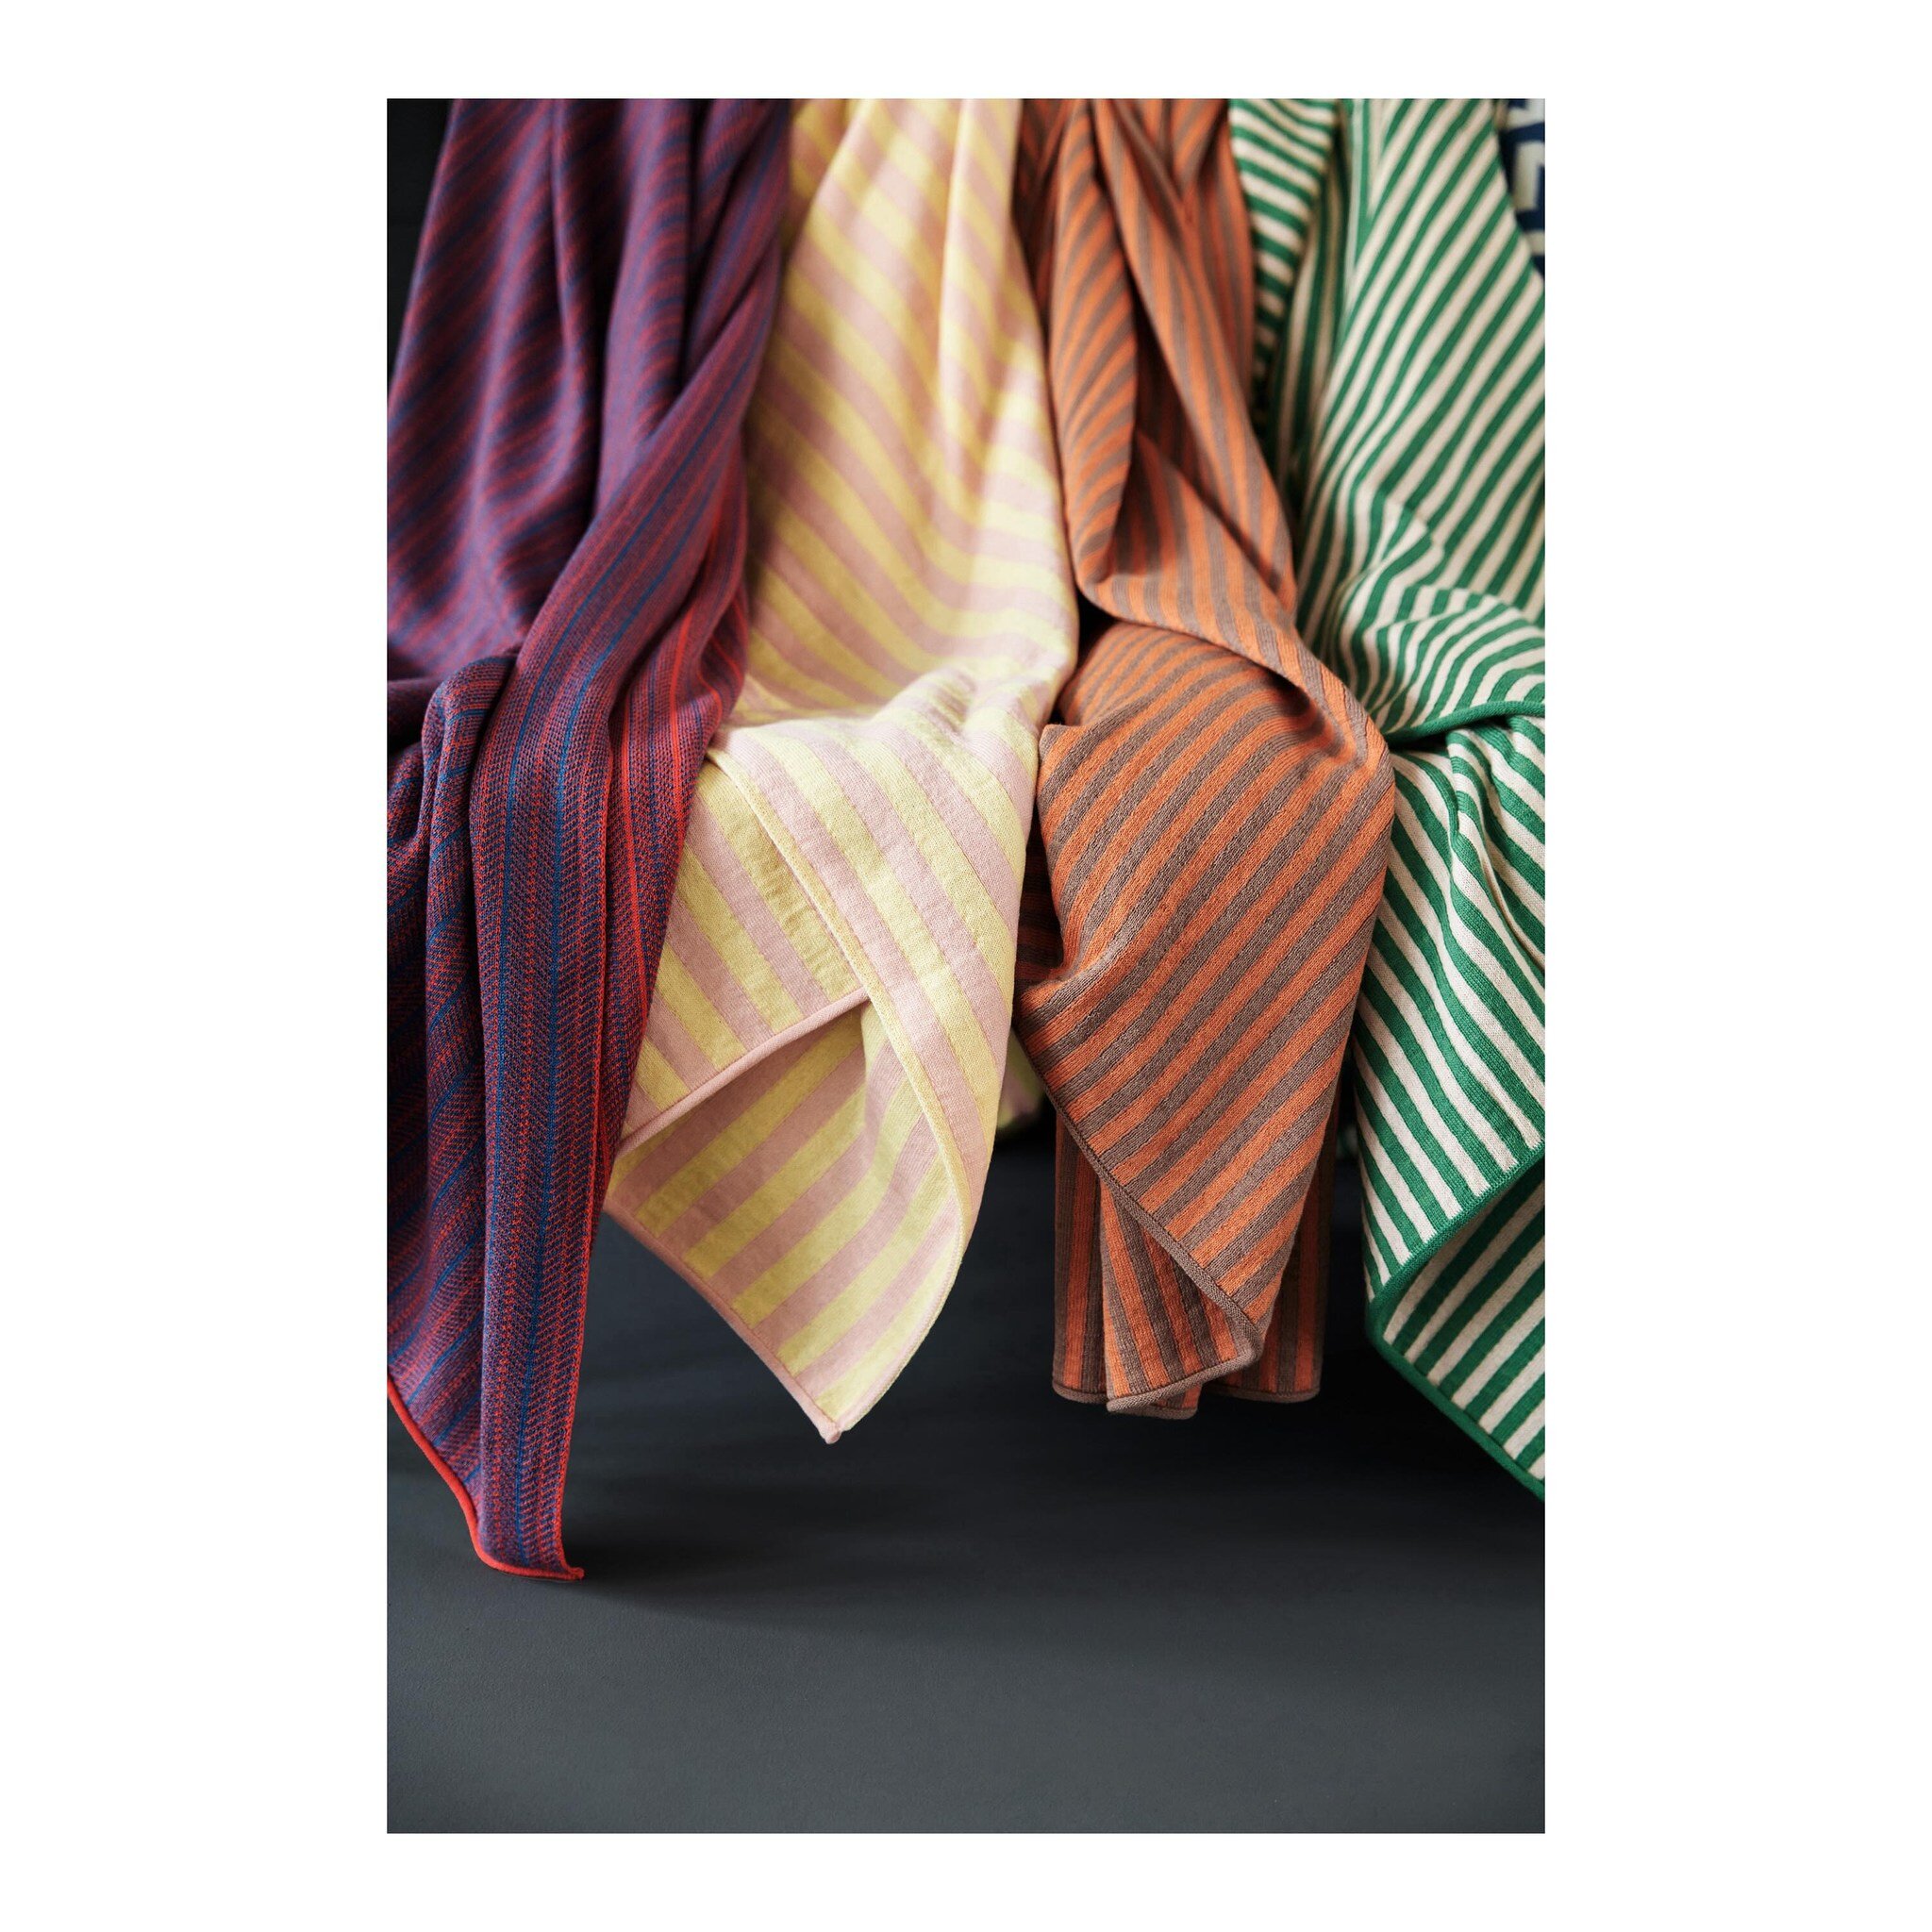 Add some fresh colour to your home with our throw blankets! Made from 100% organic merino wool, plant dyed in Vienna and knitted in Austria.